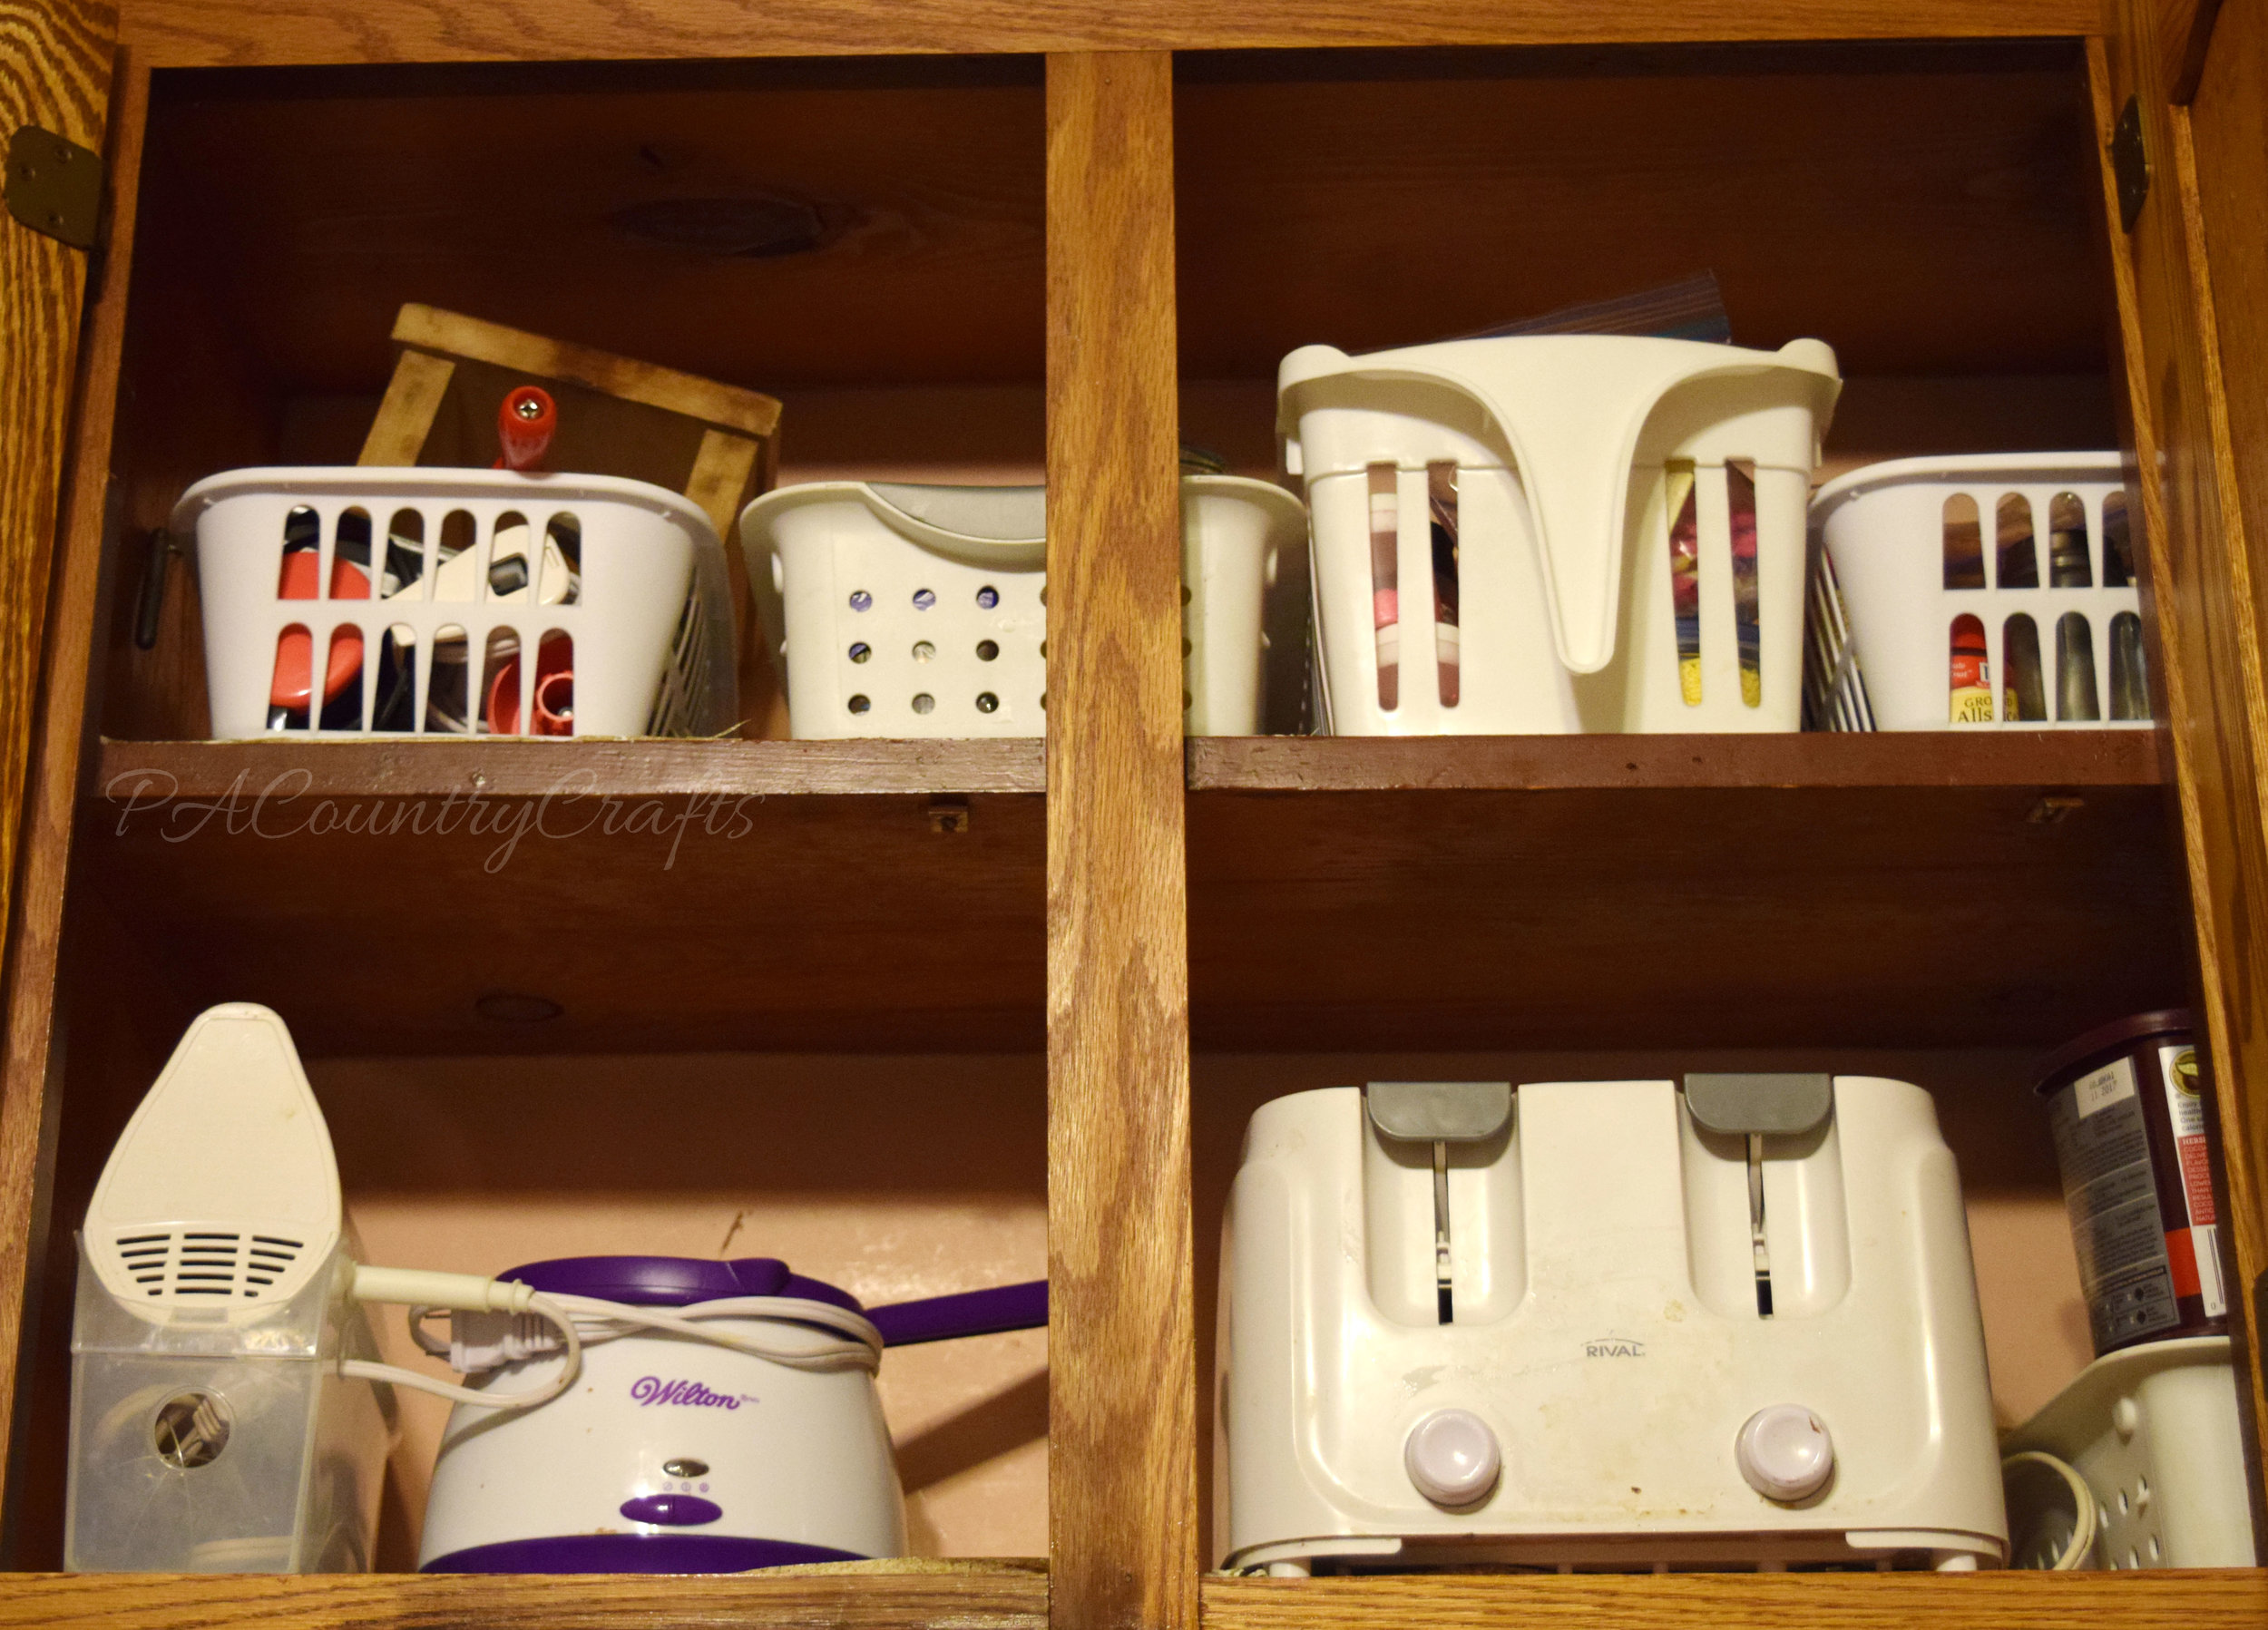 How to organize high cupboard shelves with plastic bins.